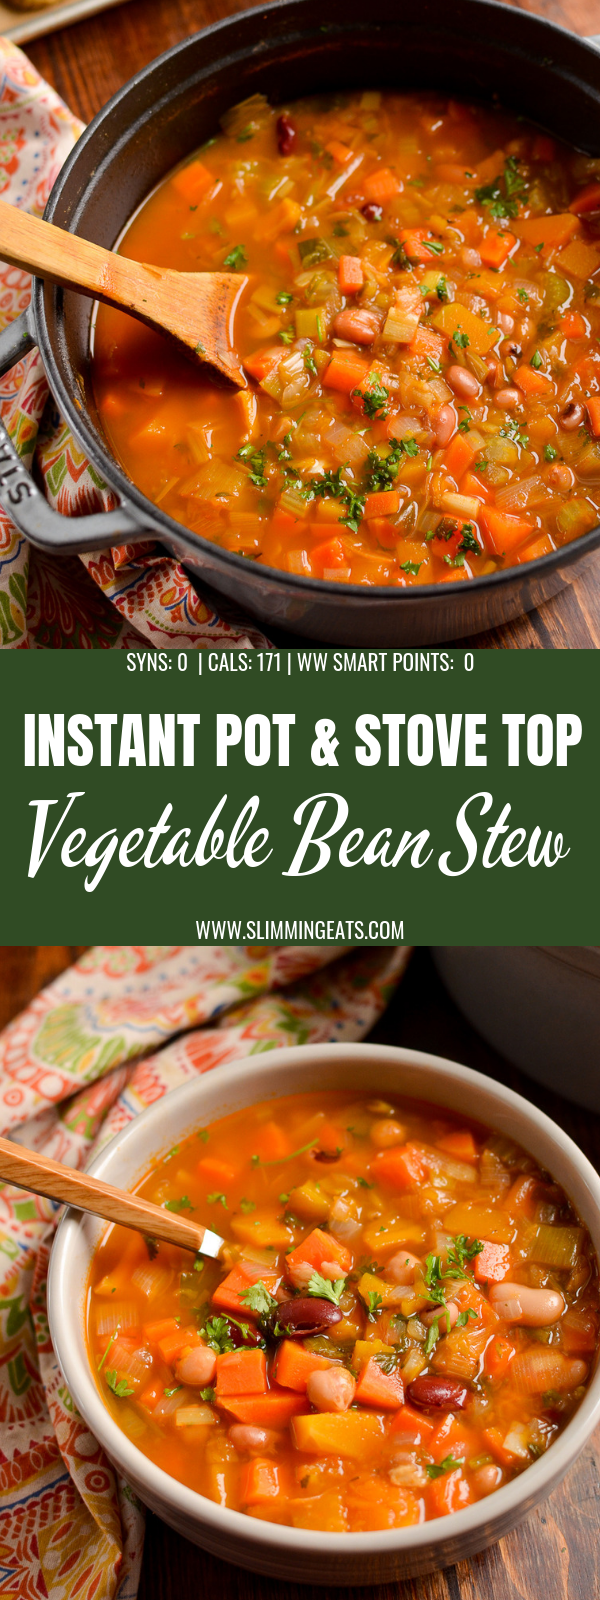 vegetable and bean stew pin image